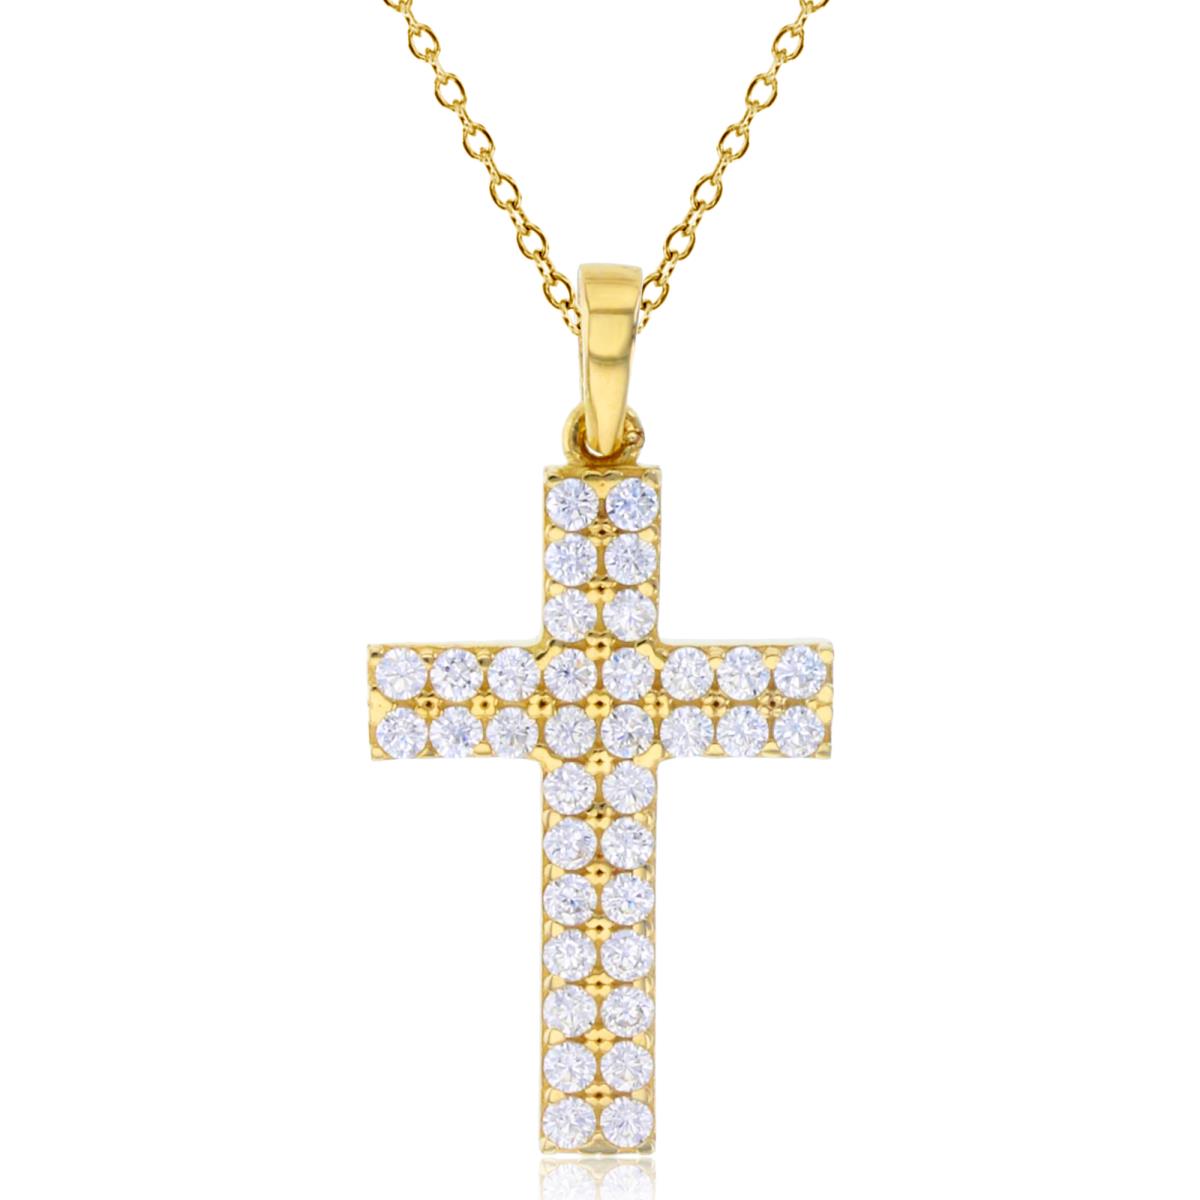 10K Yellow Gold 30x15mm Paved CZ Cross 18" Necklace